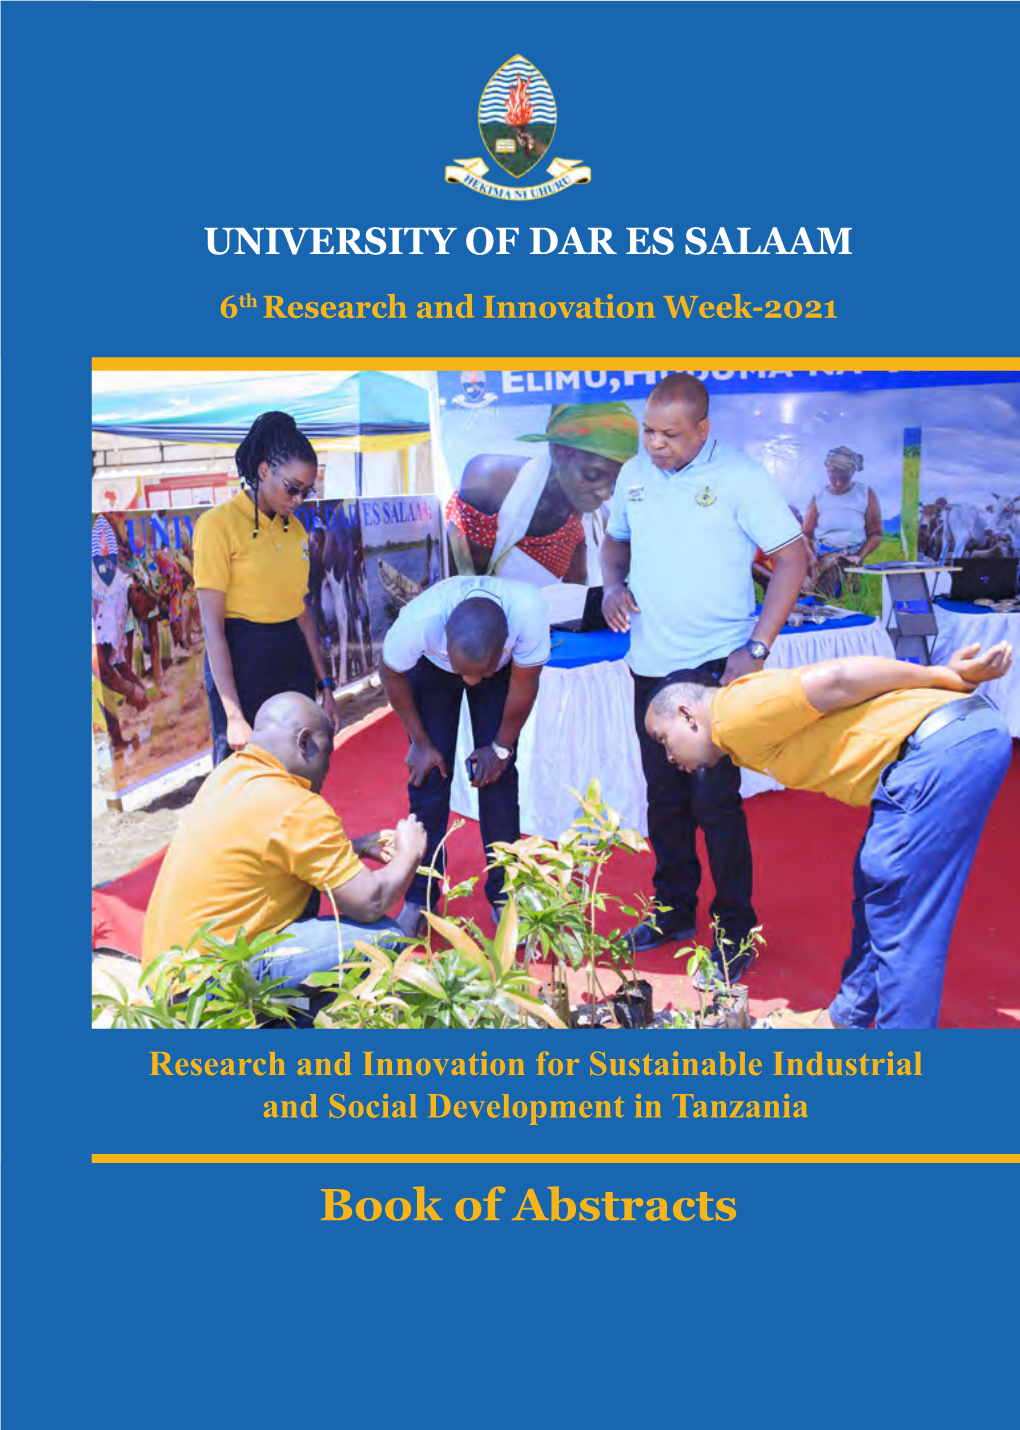 Book of Abstracts UNIVERSITY of DAR ES SALAAM